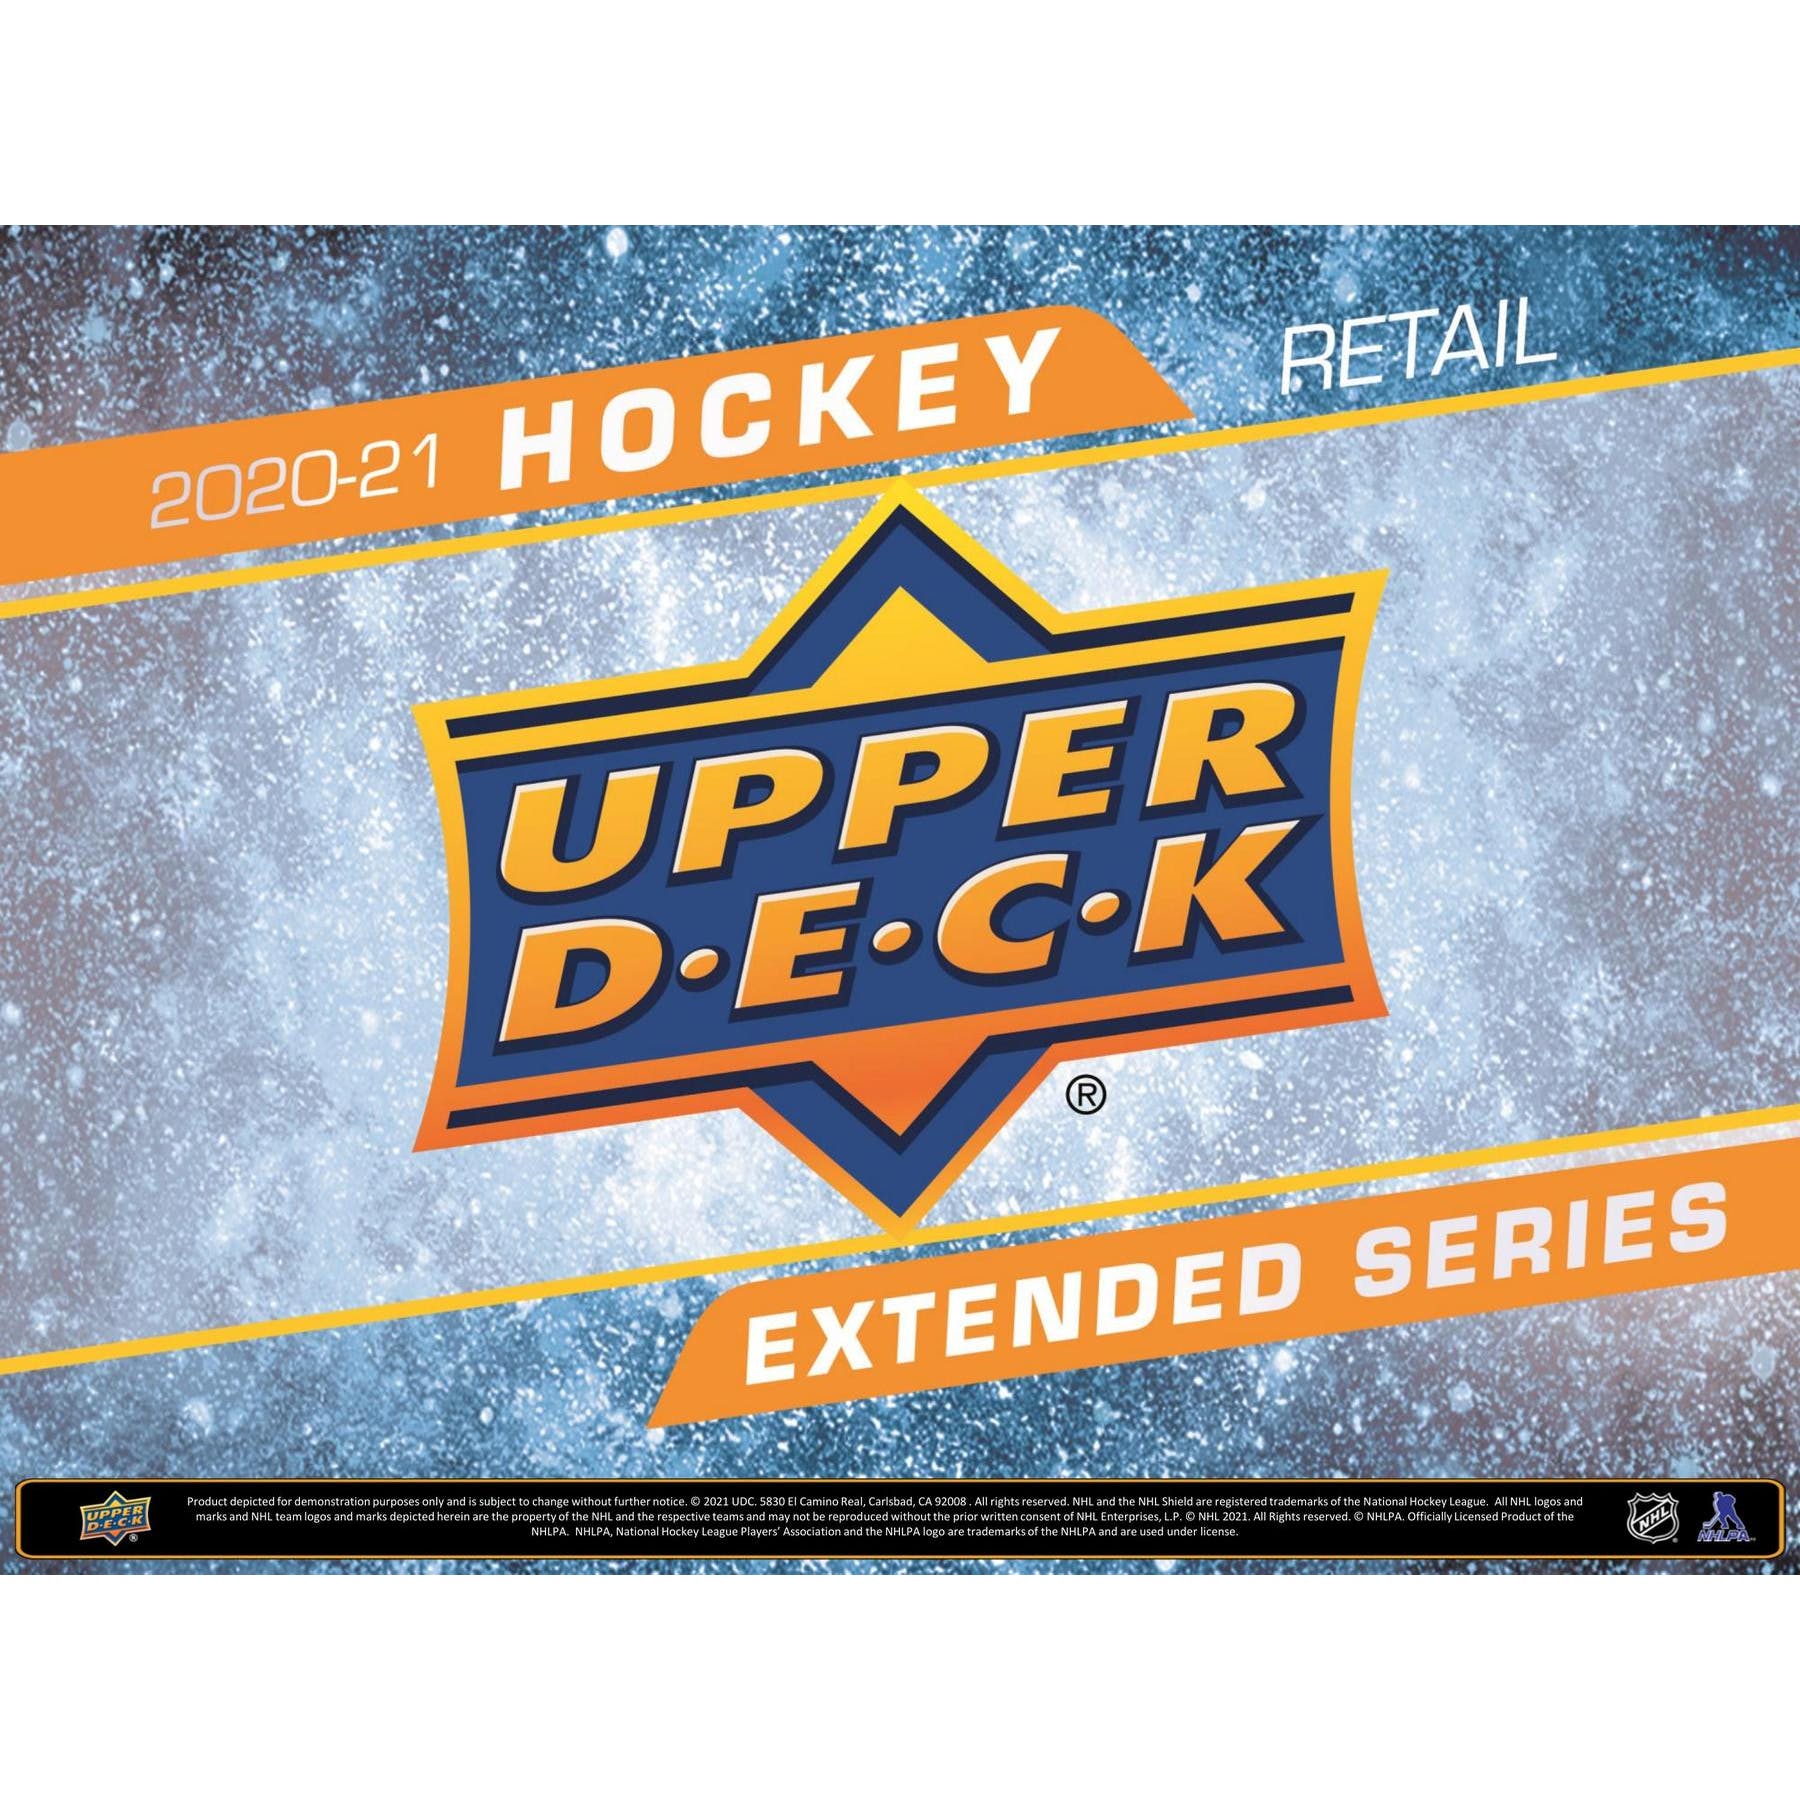 2020-21 Upper Deck Extended Series Retail Pack | Eastridge Sports Cards